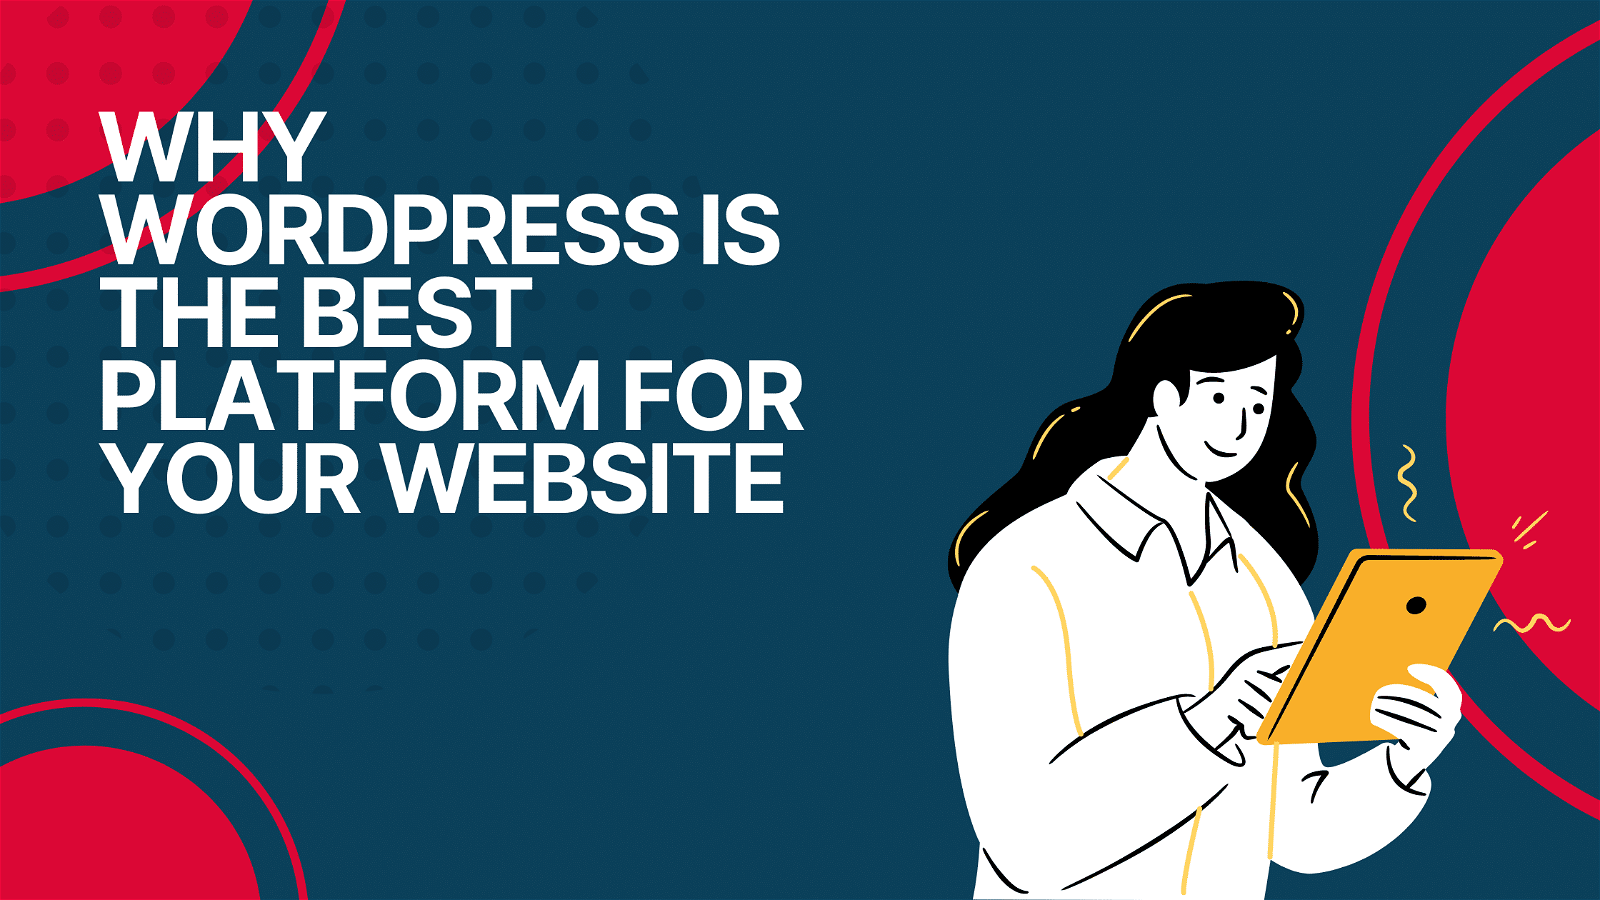 This image is promoting the use of WordPress as the best platform for creating a website.